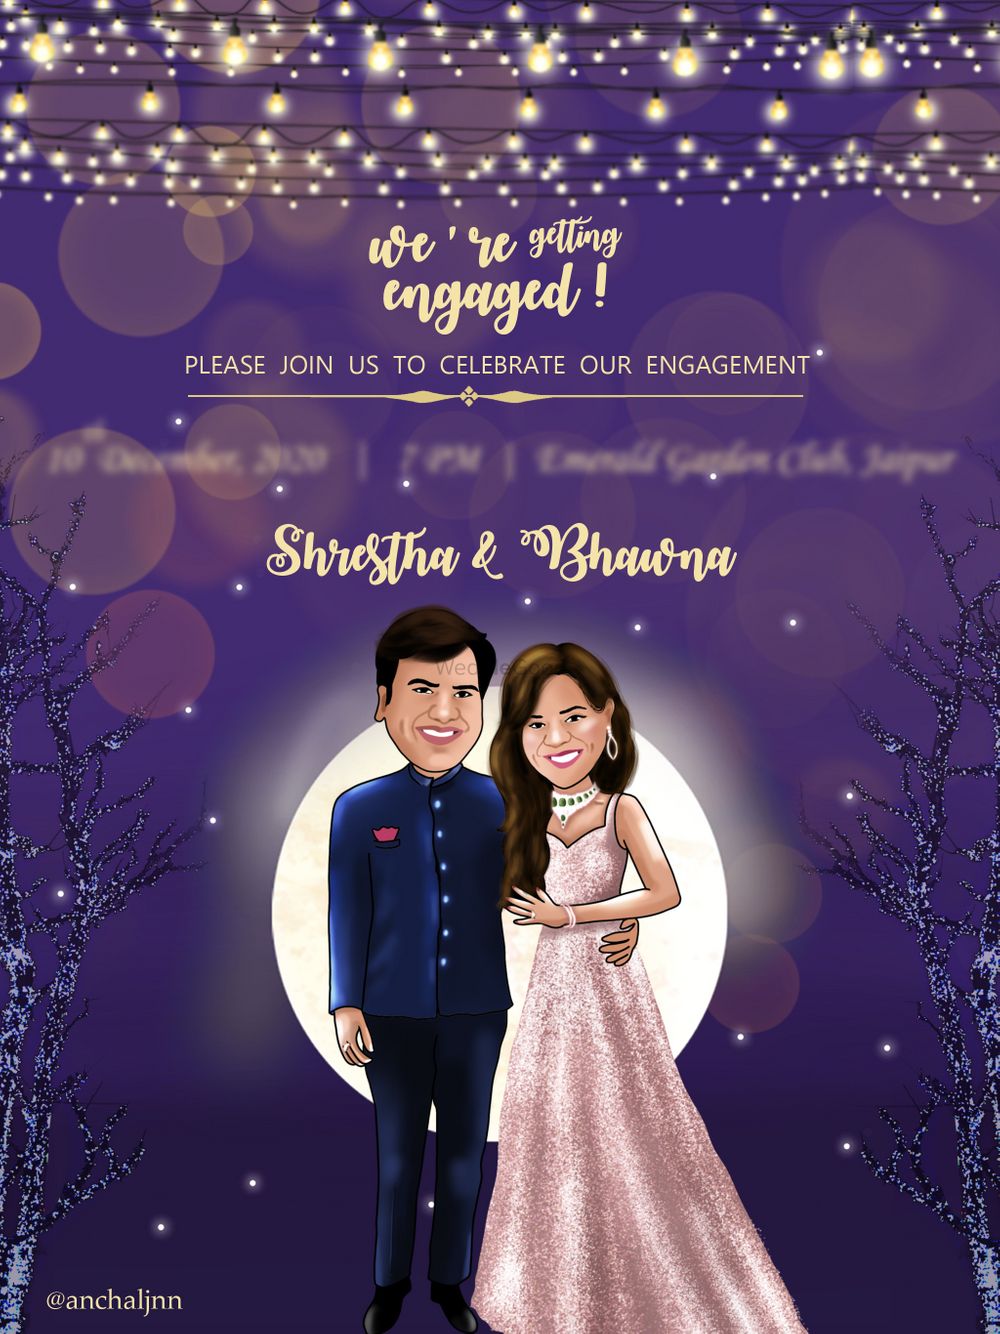 Photo From Engagement Invite - By Anchal Jain